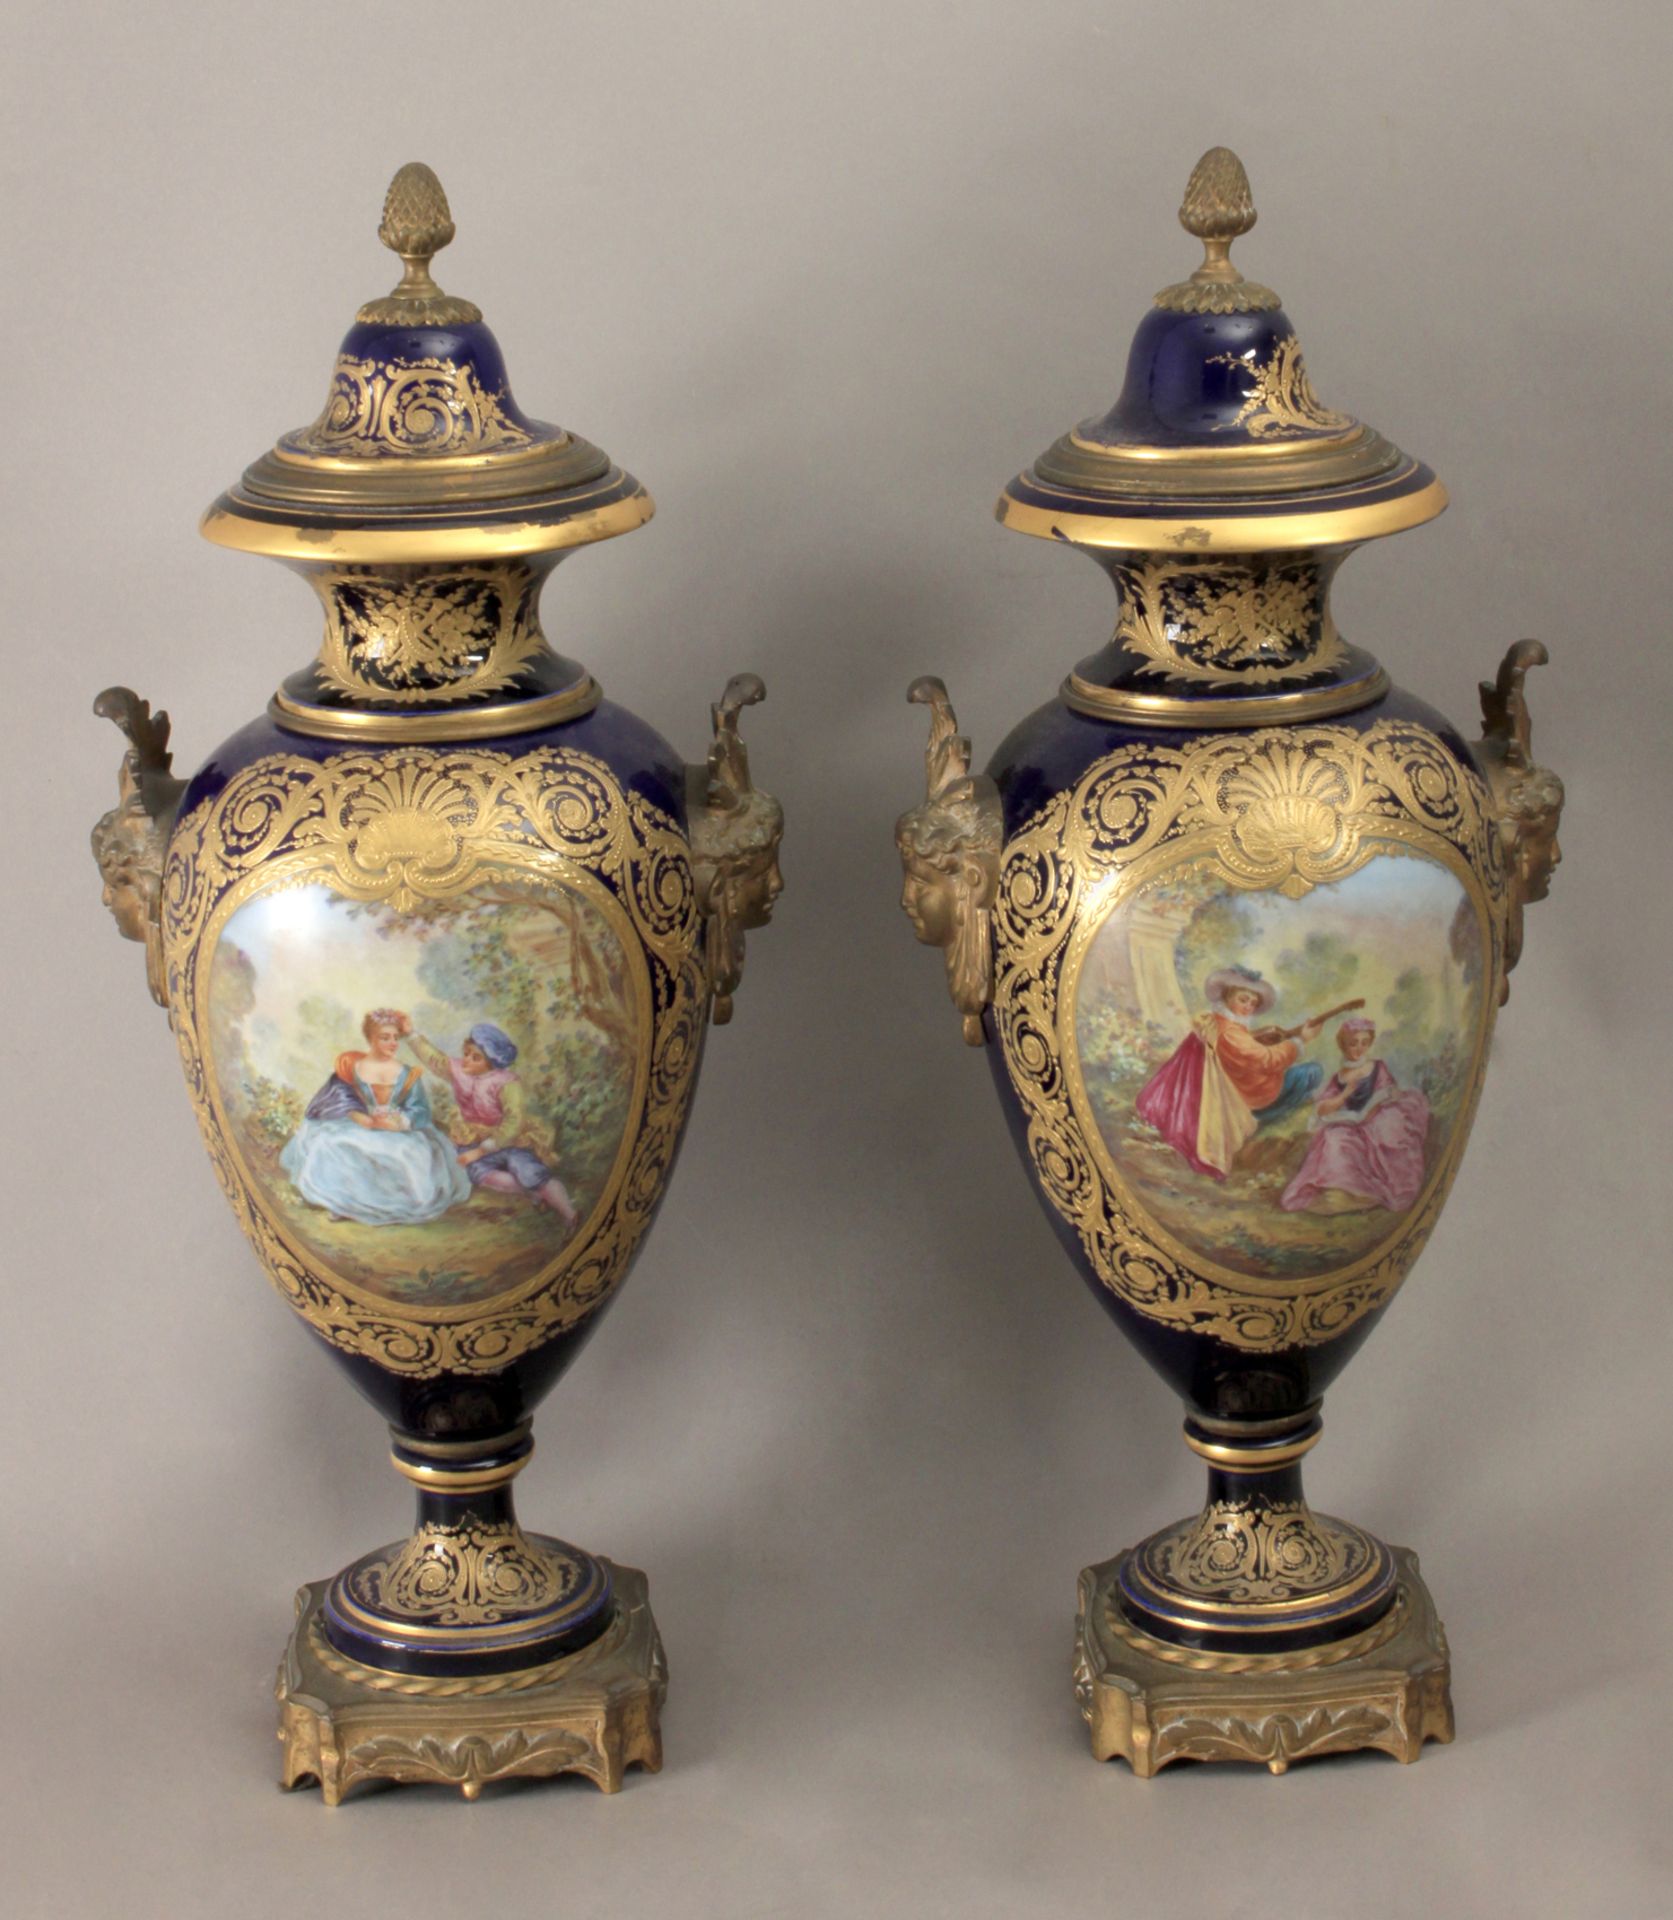 A pair of 18th century French vases and covers in Sévres porcelain garnished with gilt bronze